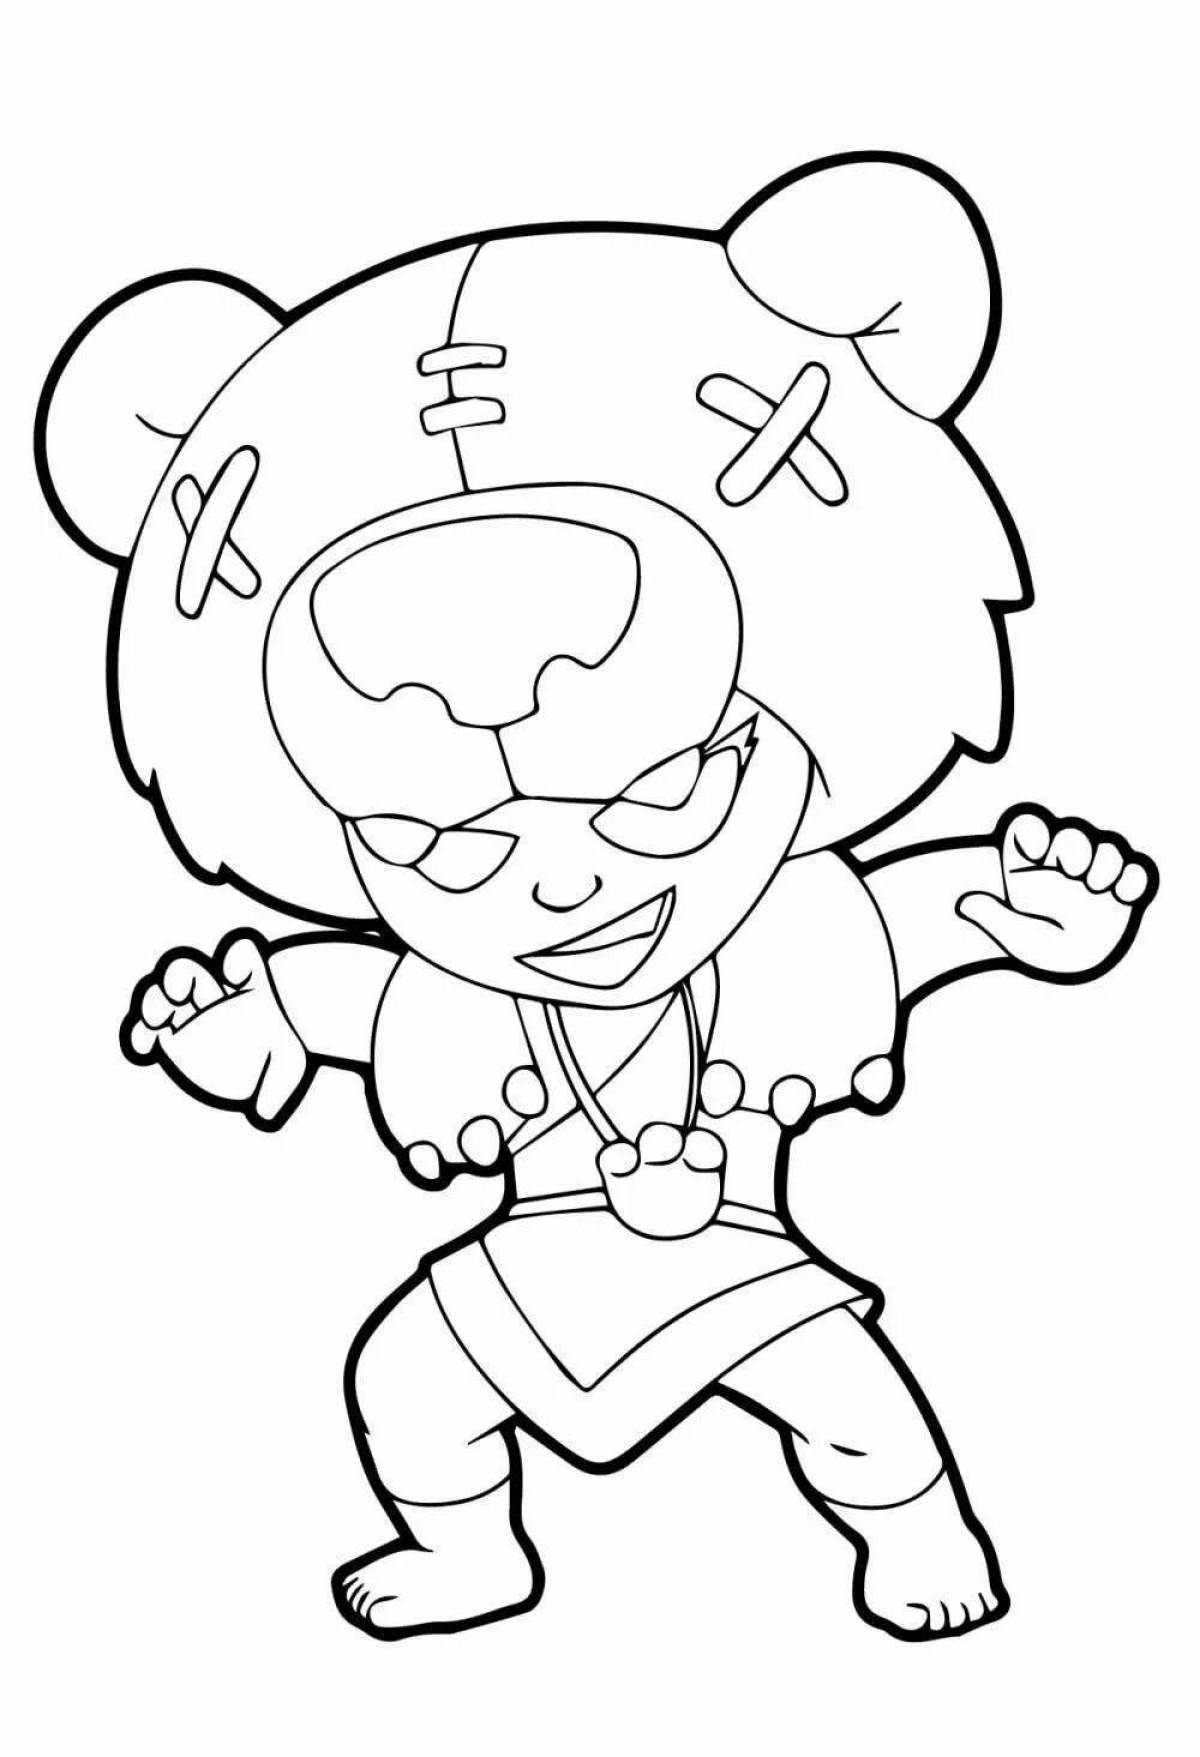 Humorous character coloring pages from brawl stars